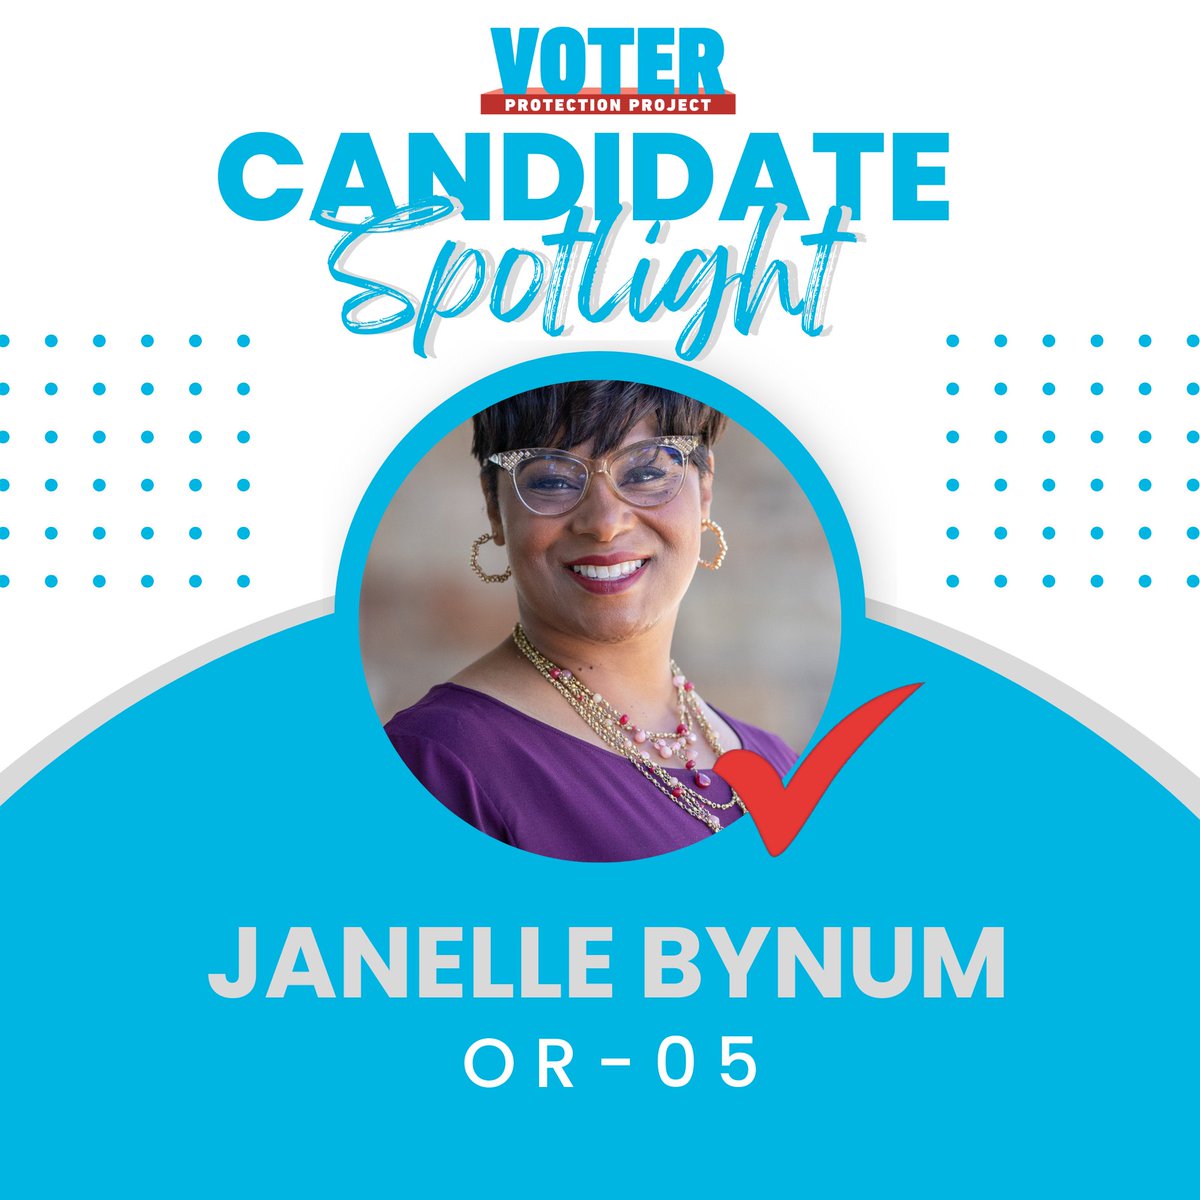 📣 Our May Candidate Spotlight is @bynum4thewin! 🌟 Janelle is a real fighter for voting rights and is the ideal Democrat who can unseat MAGA Republican Lori Chavez-DeRemer this November. 🗓️ OR's primary is next Tuesday. Let's help Janelle win! #VoteJanelleBynum #OregonPrimary